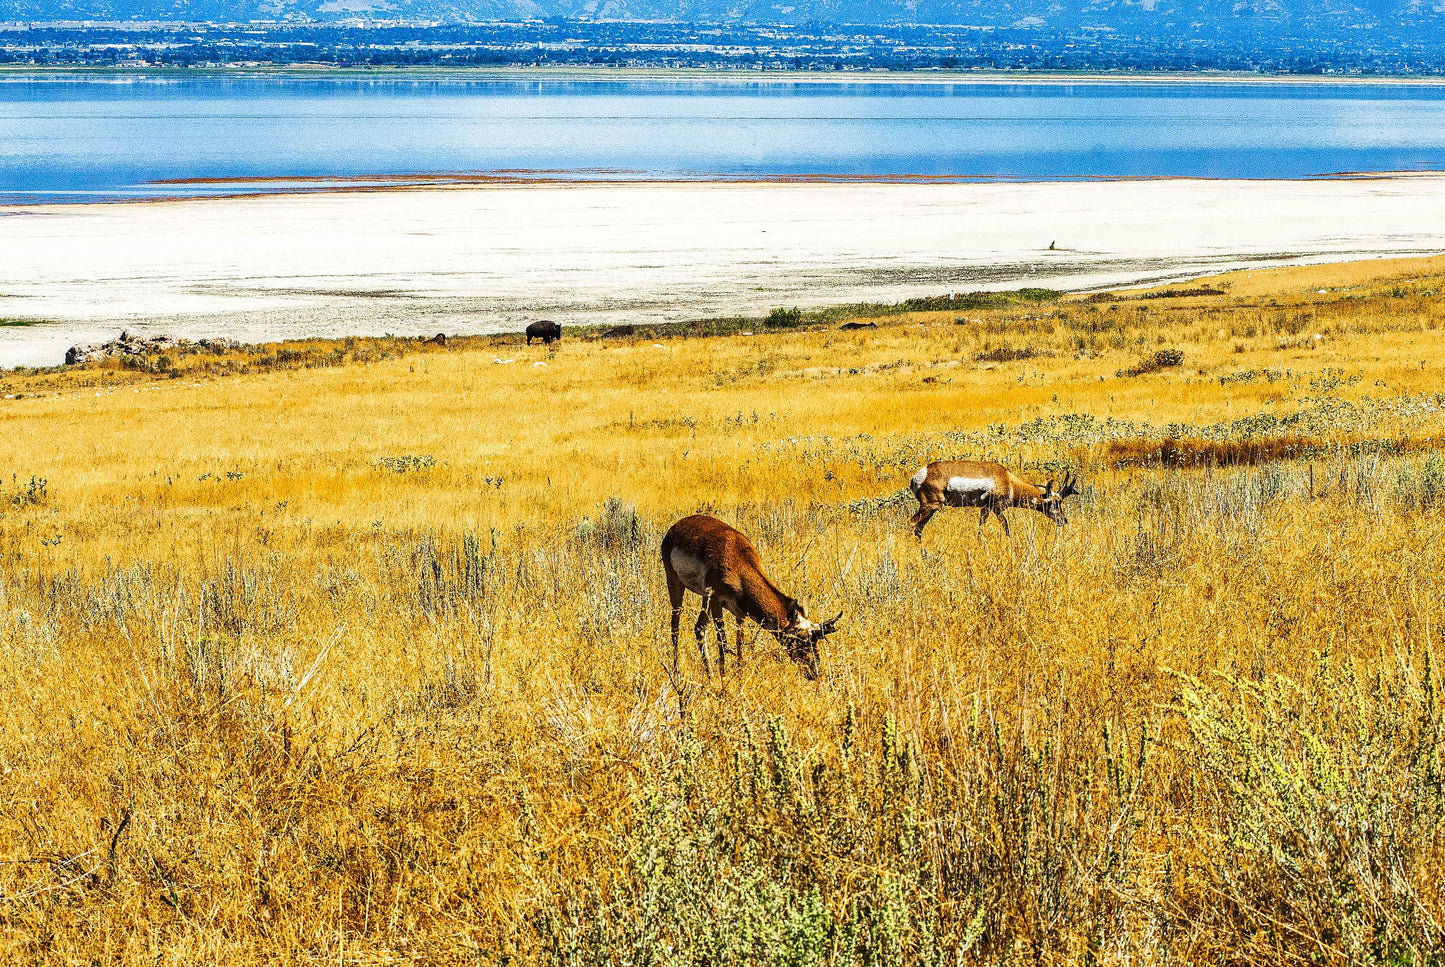 Alessandra Mattanza | FREE, Antelope Island, Utah, USA. Antelope graze in the peacful surrounding of Antelope Island State Park northwest of Salt Lake City. Available as an art print or as a photographic print on acrylic glass.